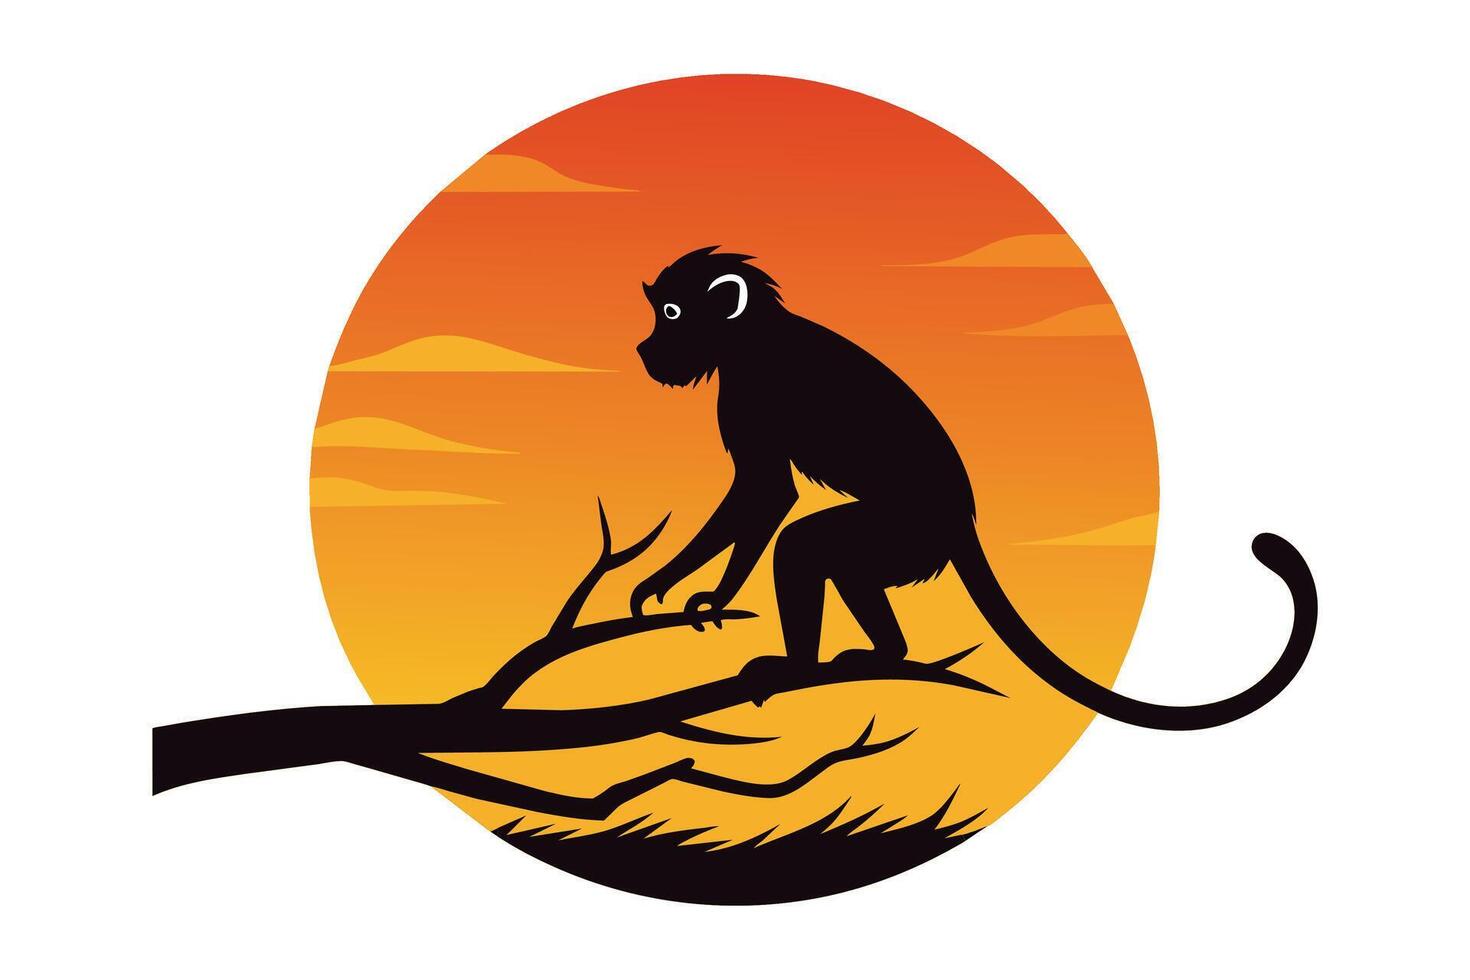 Monkey Silhouette on Sunset Branch Illustration for Wall Art Posters vector